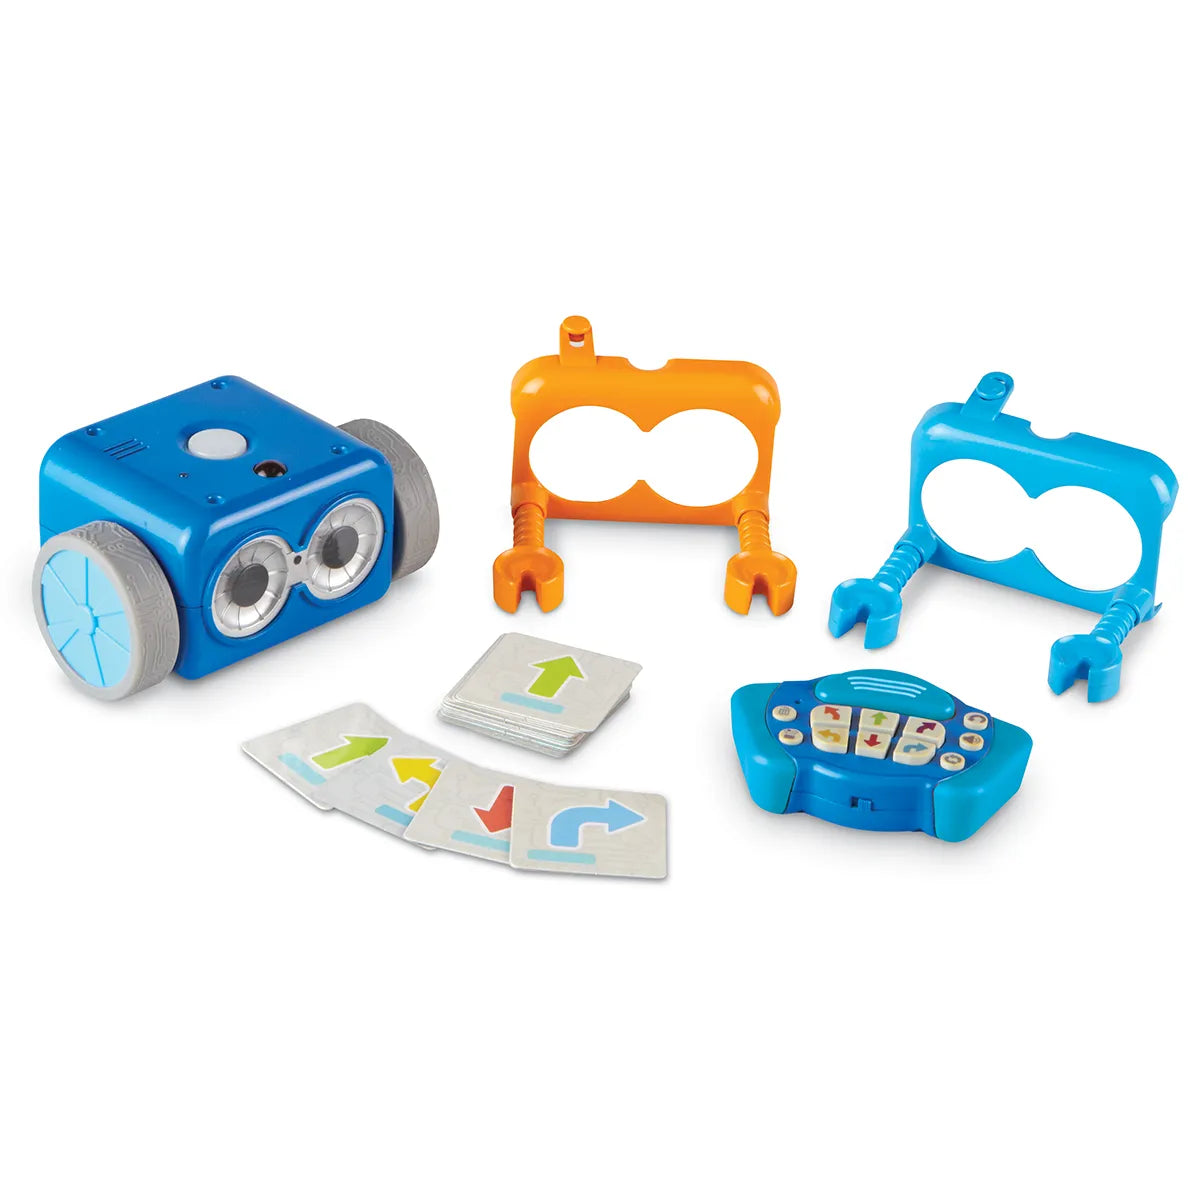 Toys that can improve logical thinking skills